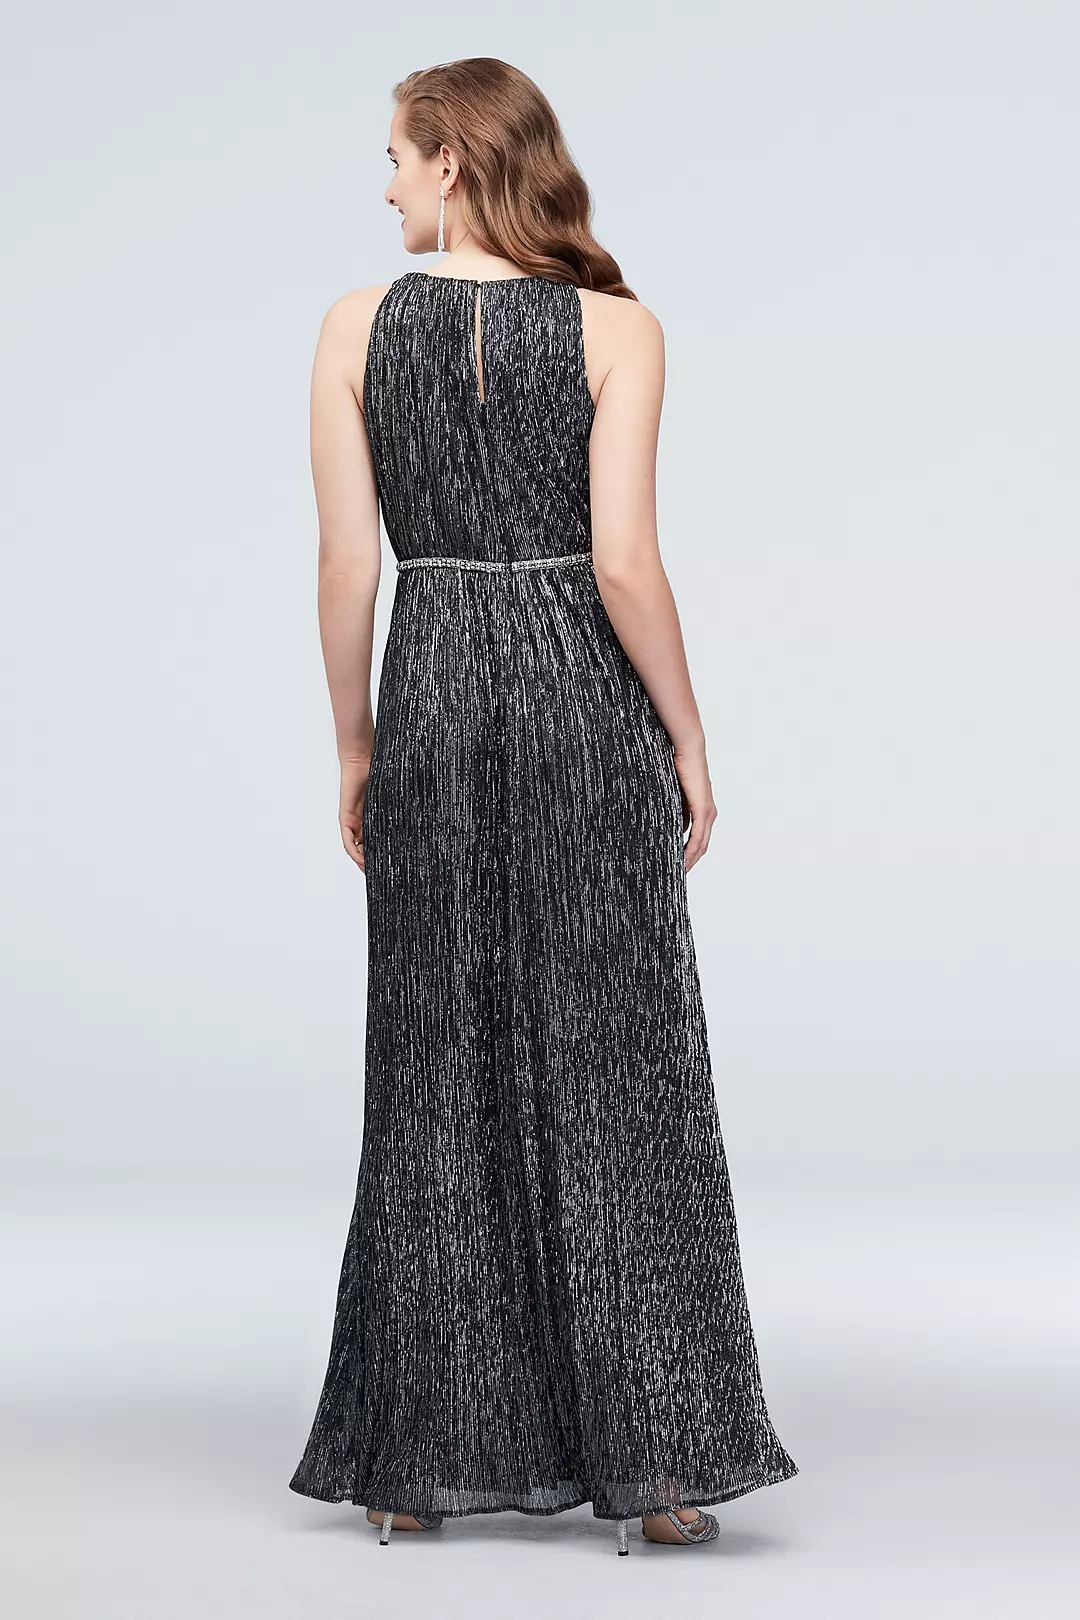 Shimmer Metallic Halter Gown with Beaded Belt Image 2